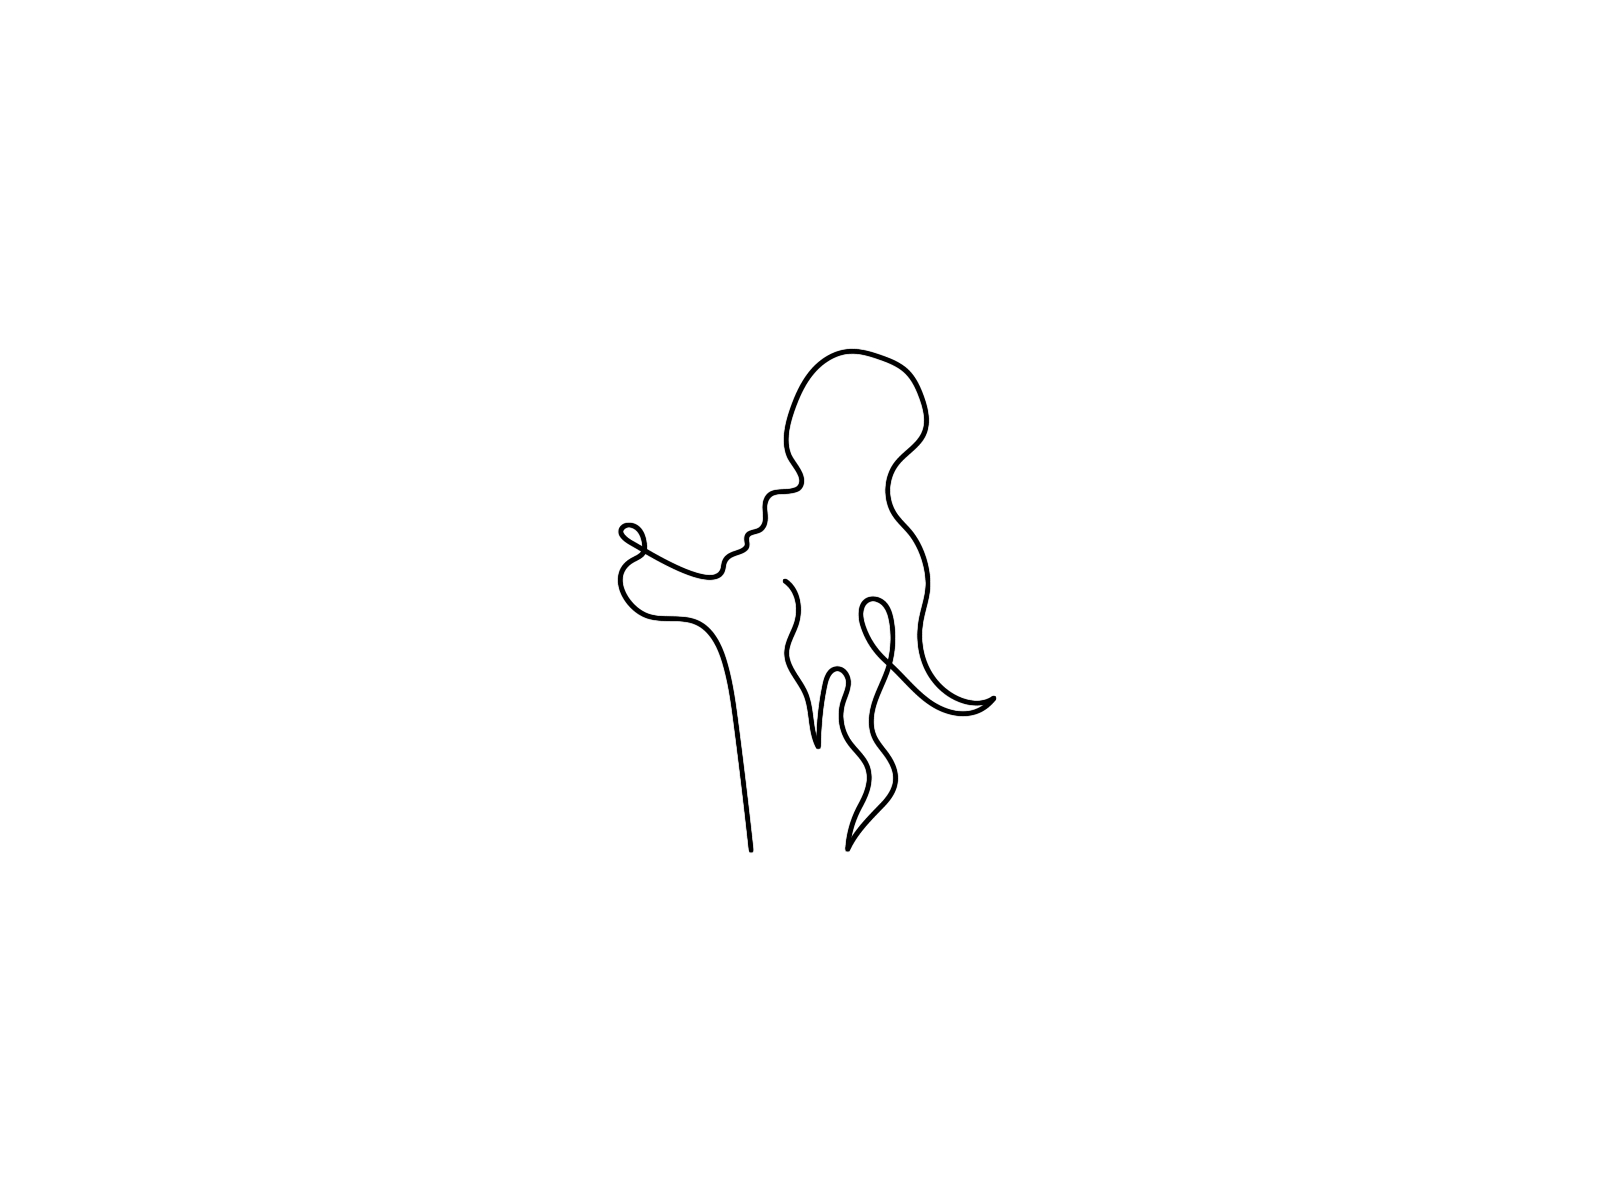 Shy animation beautiful beauty branding design draw drawing face girl graphic design illustration line lines logo minimal motion oneline people simple woman